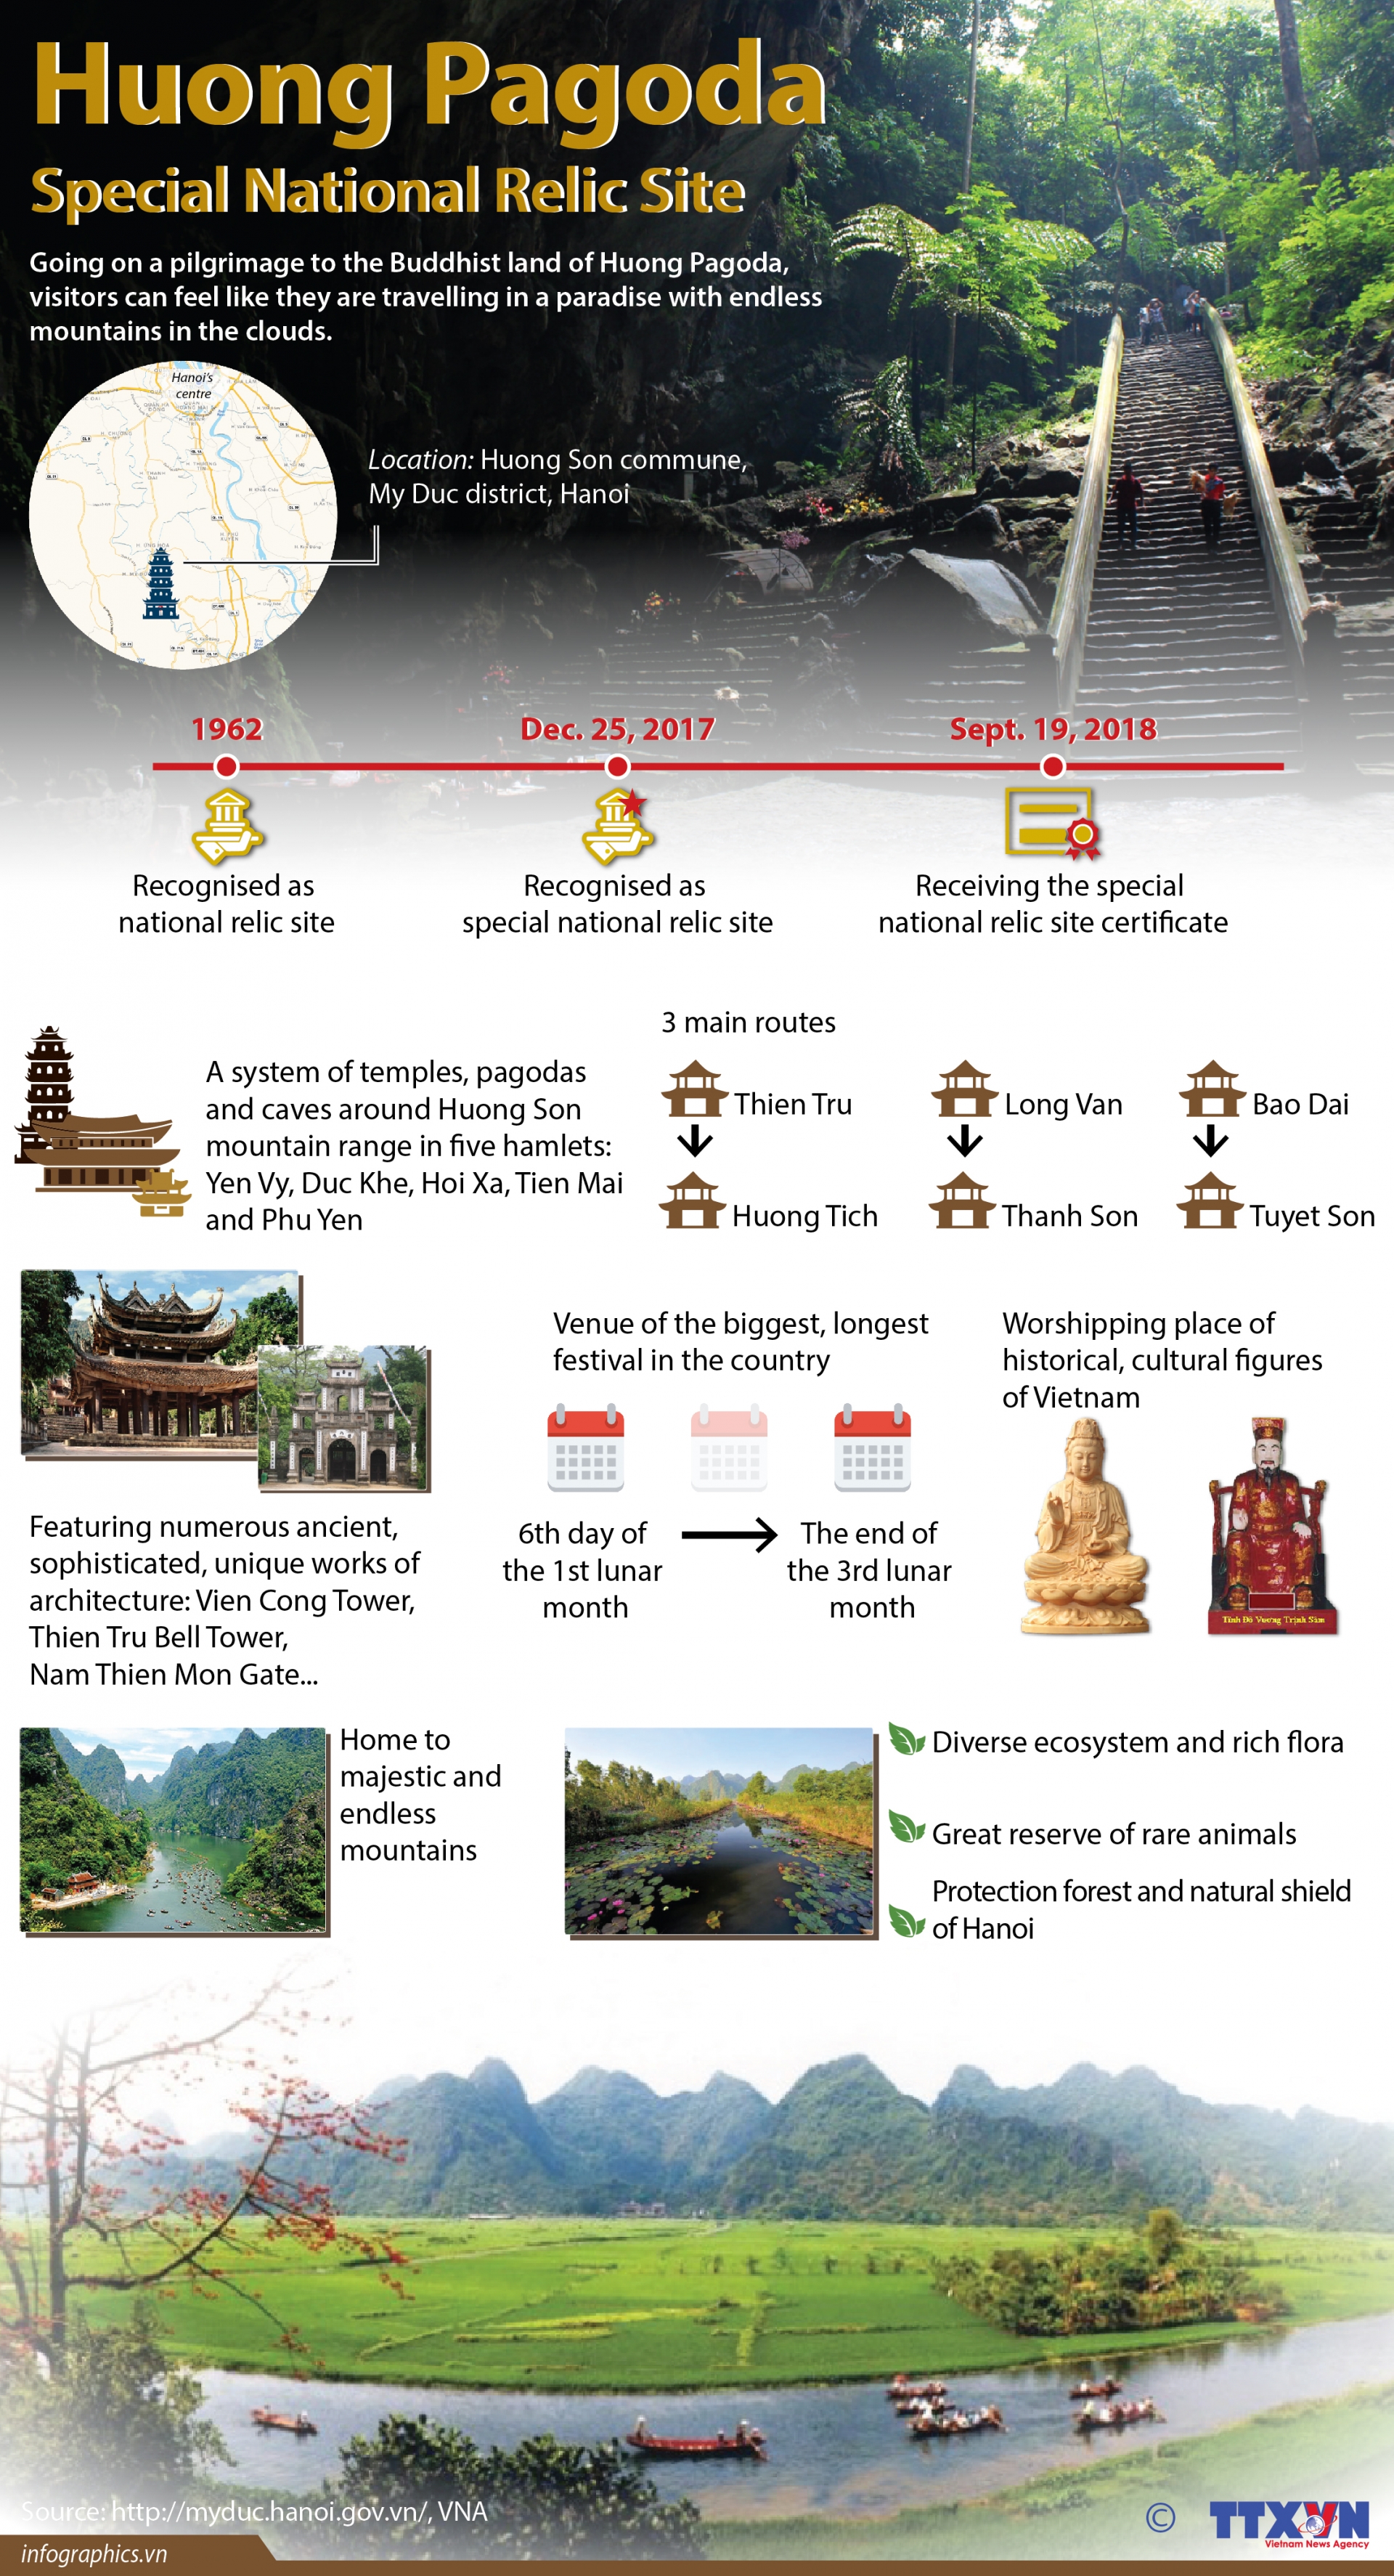 huong pagoda special national relic site